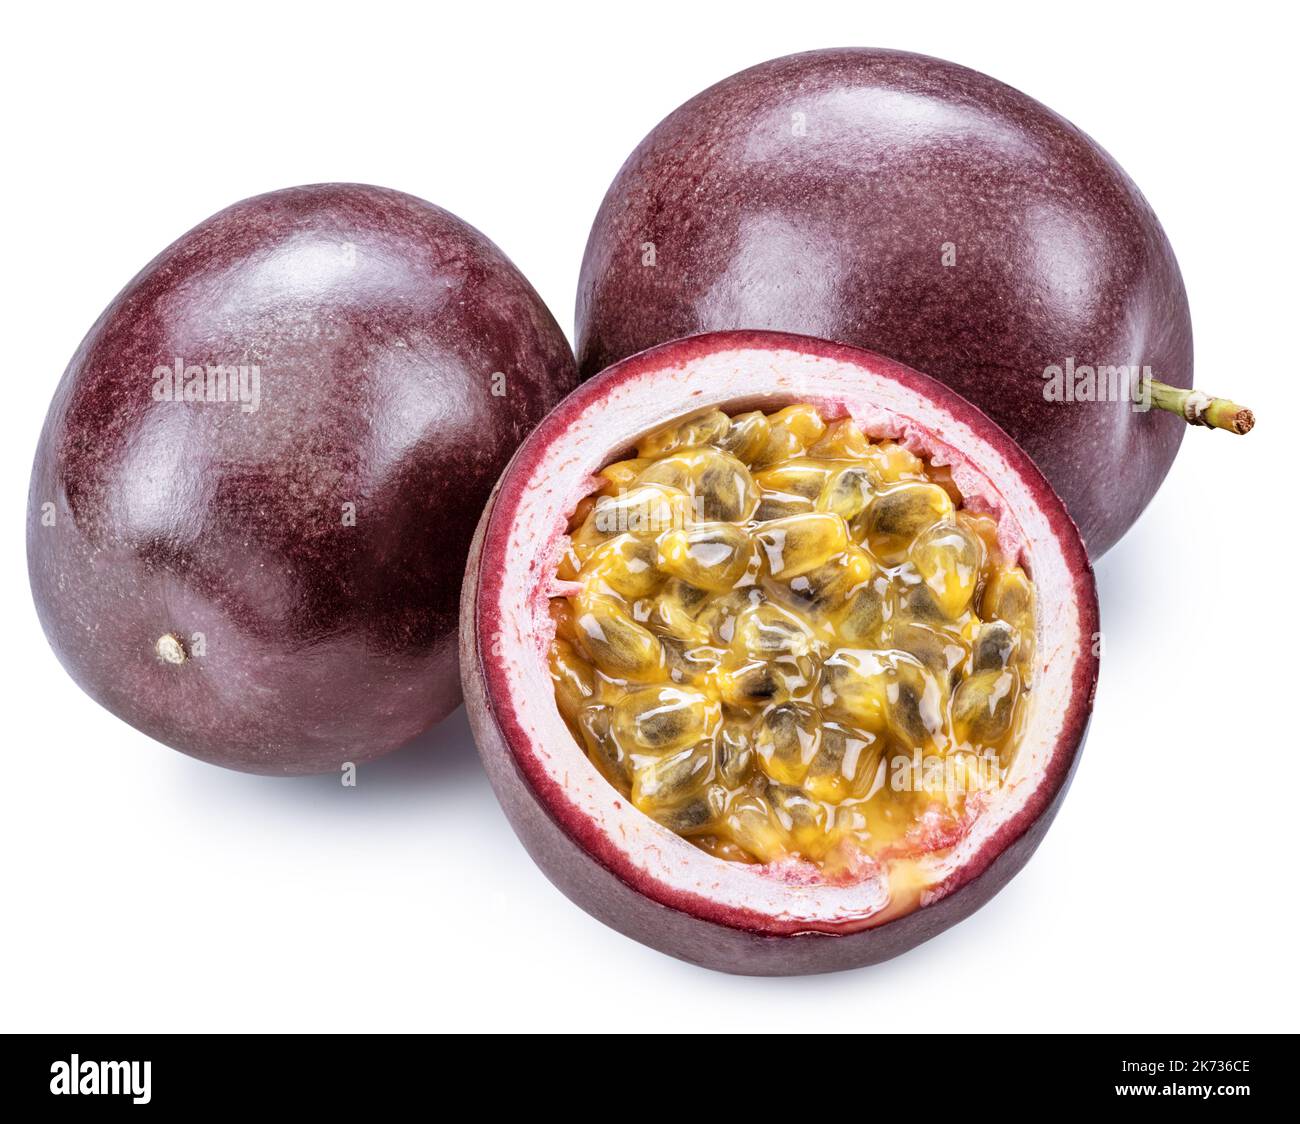 Dark purple passion fruits and half of fruit on white background. Stock Photo